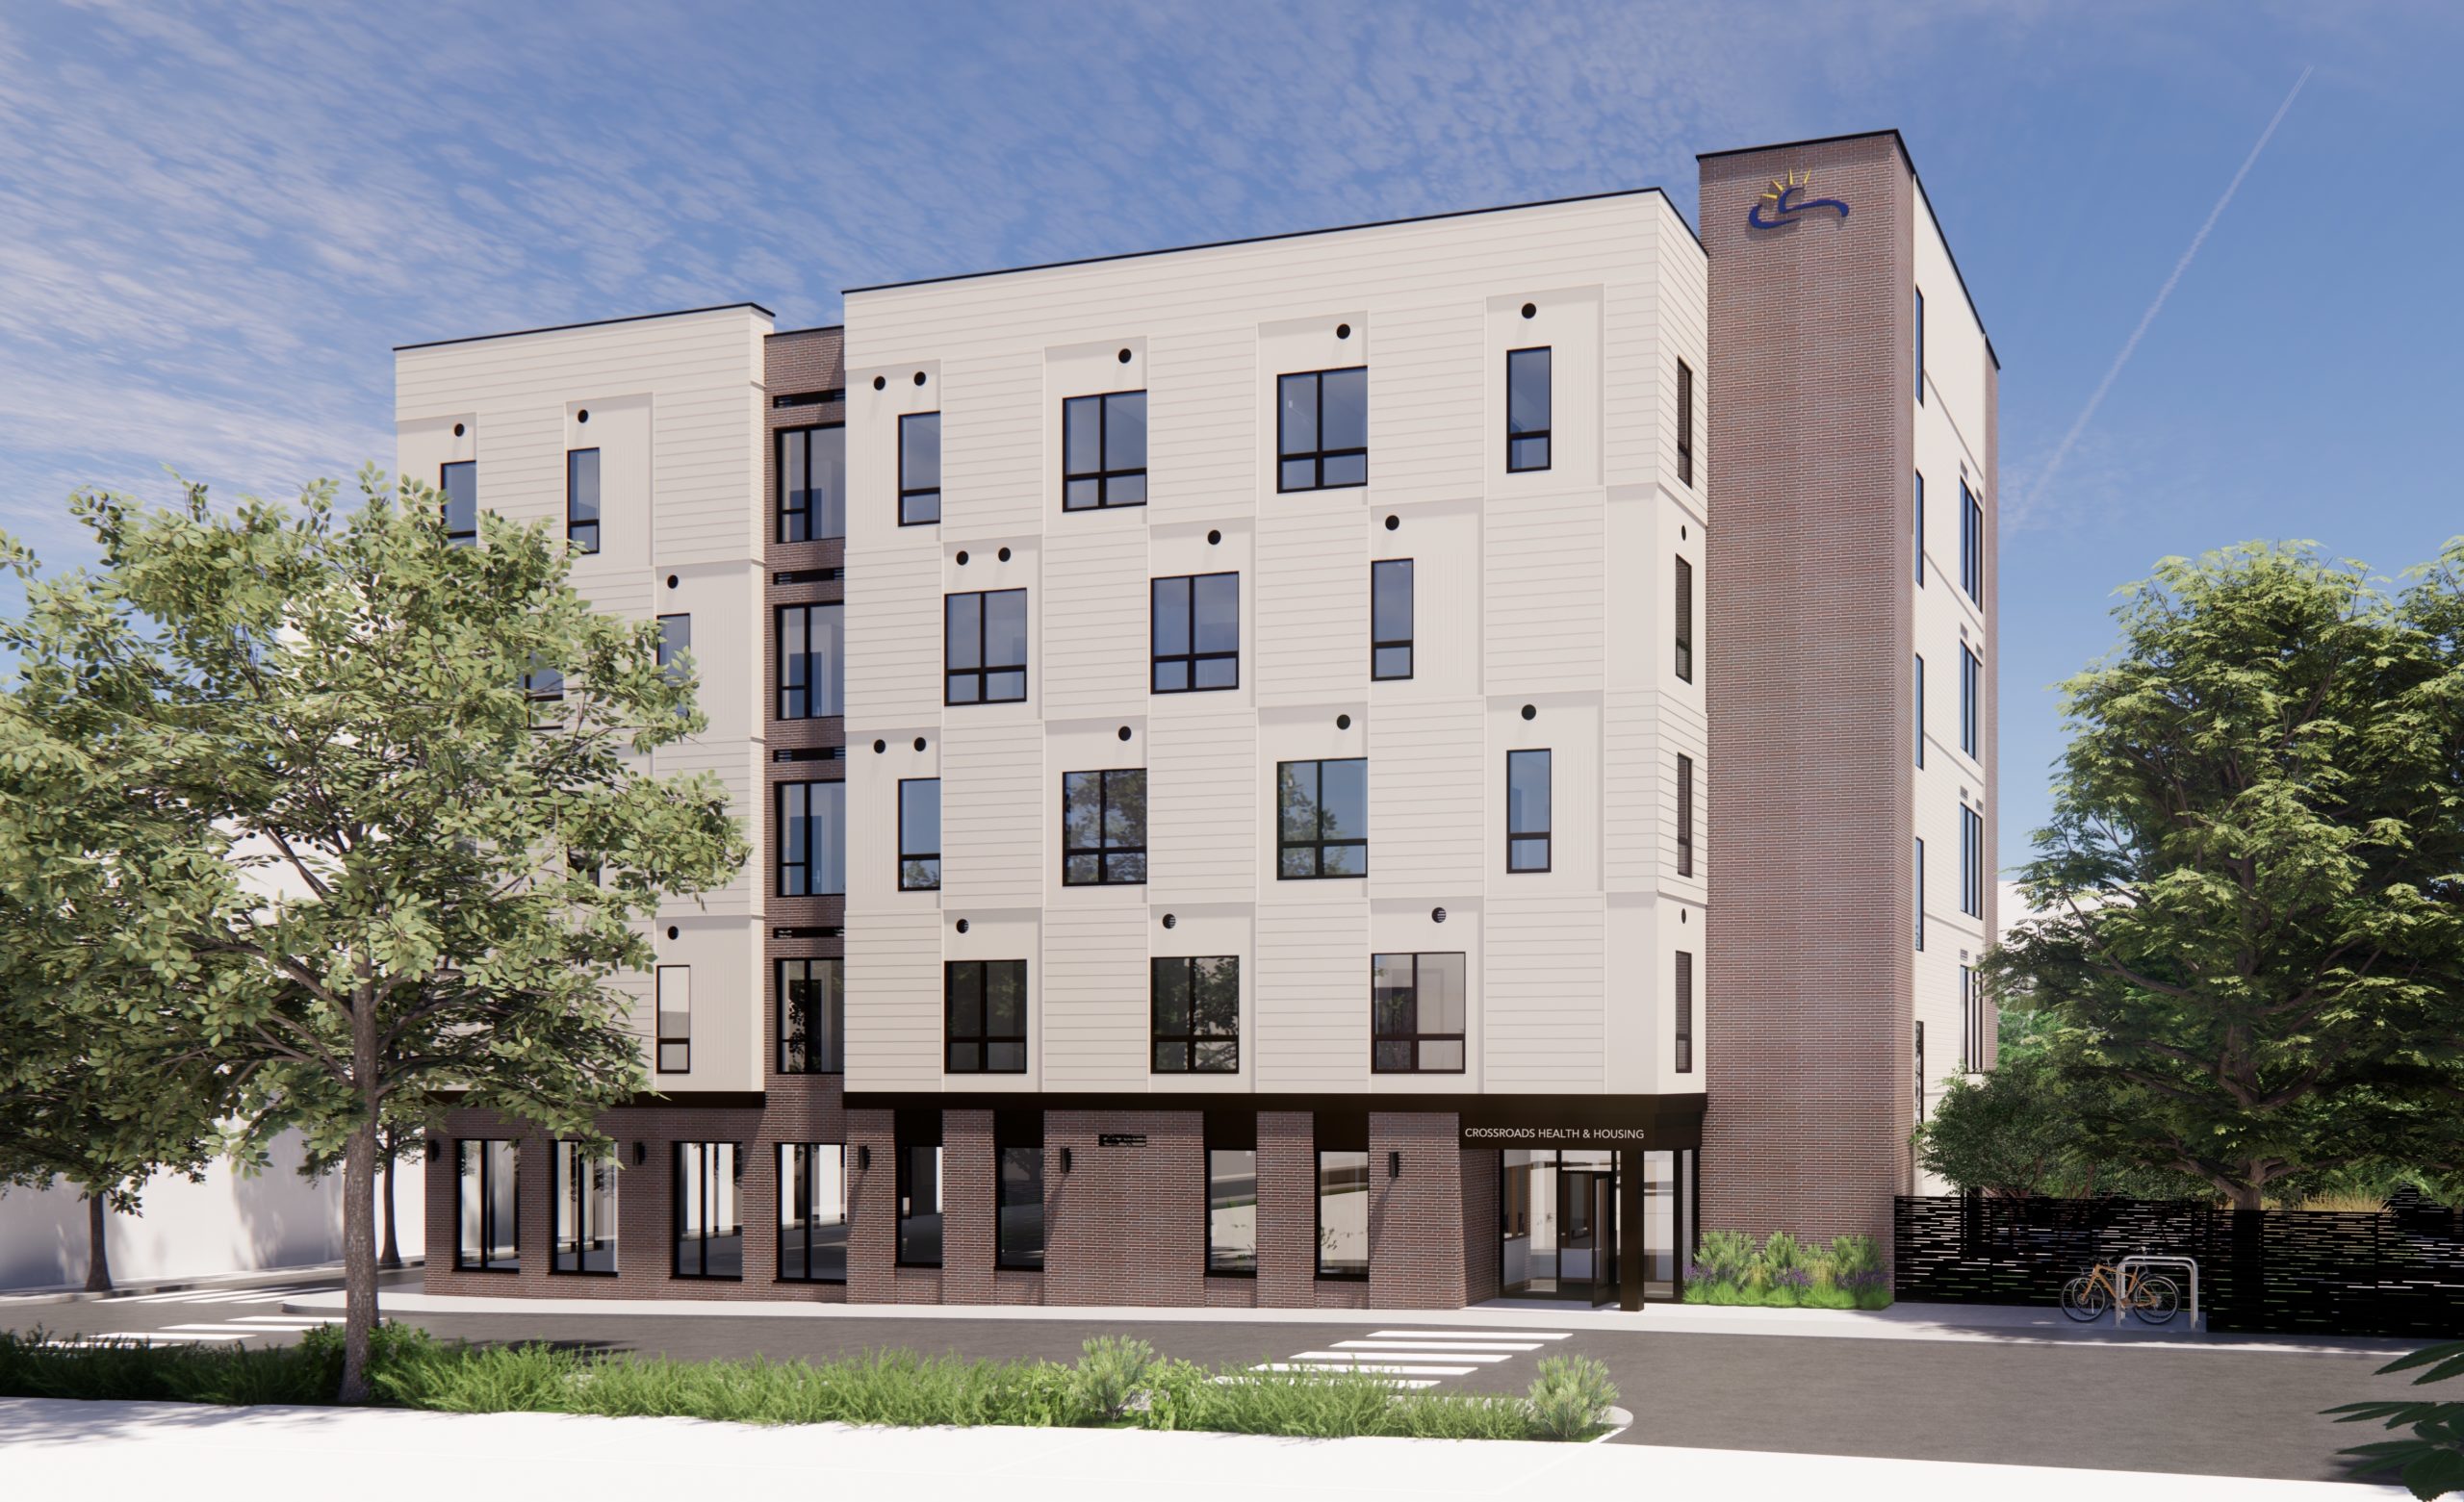 Featured Project: Pine Street Permanent Supportive Housing